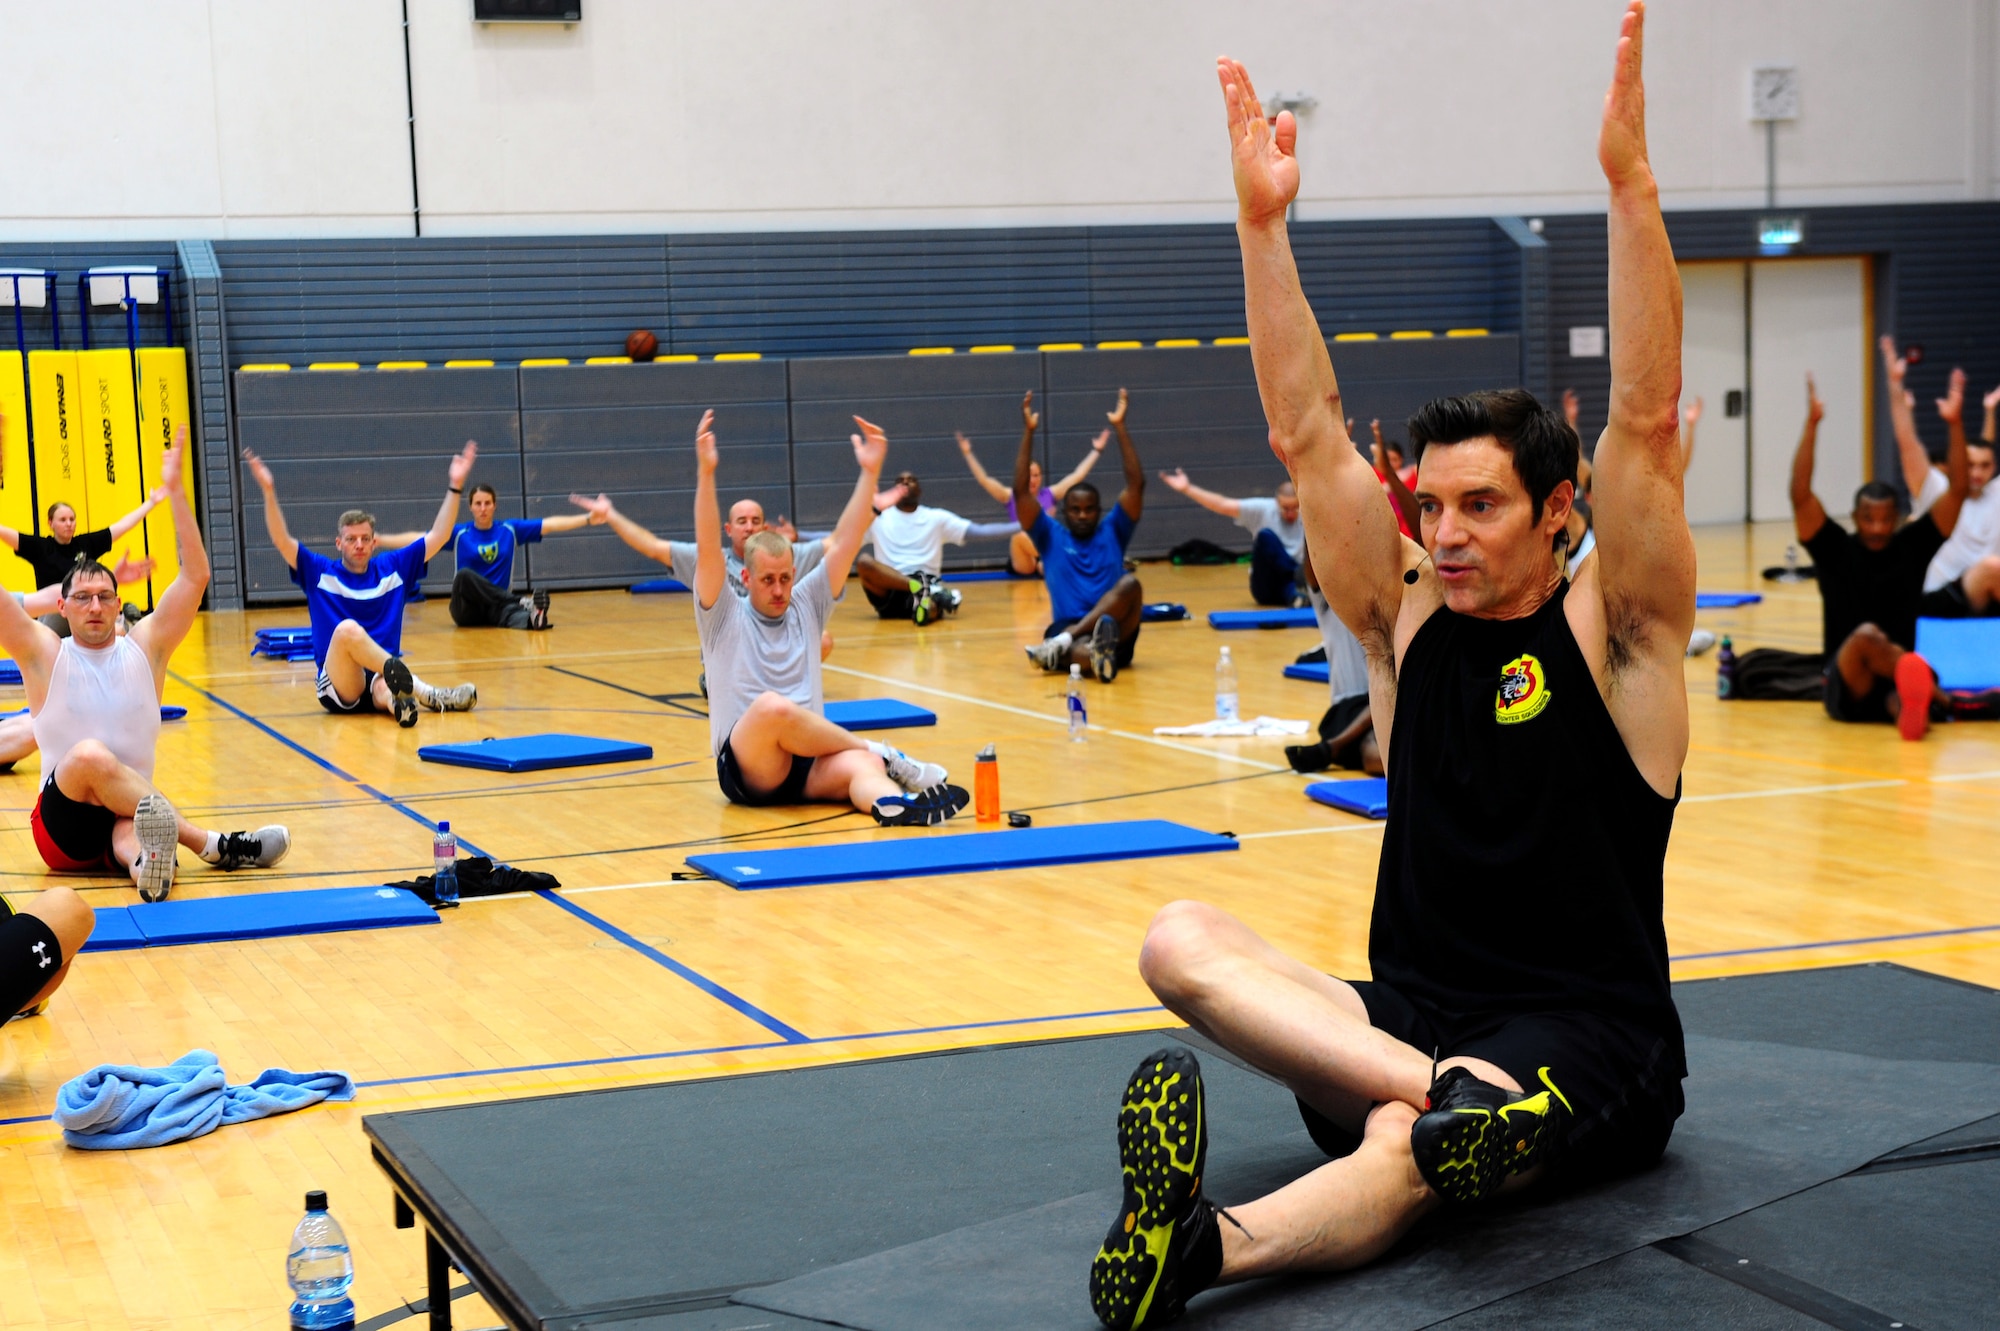 Tony Horton, creator of workout program P90X, leads a warm-up stretch before a calisthenics routine at the southside gym, Ramstein Air Base, Germany, Oct. 7, 2011. Horton conducted two free strength training workout sessions for 325 military personnel and dependents. (U.S. Air Force photo by Airman 1st Class Brea Miller)